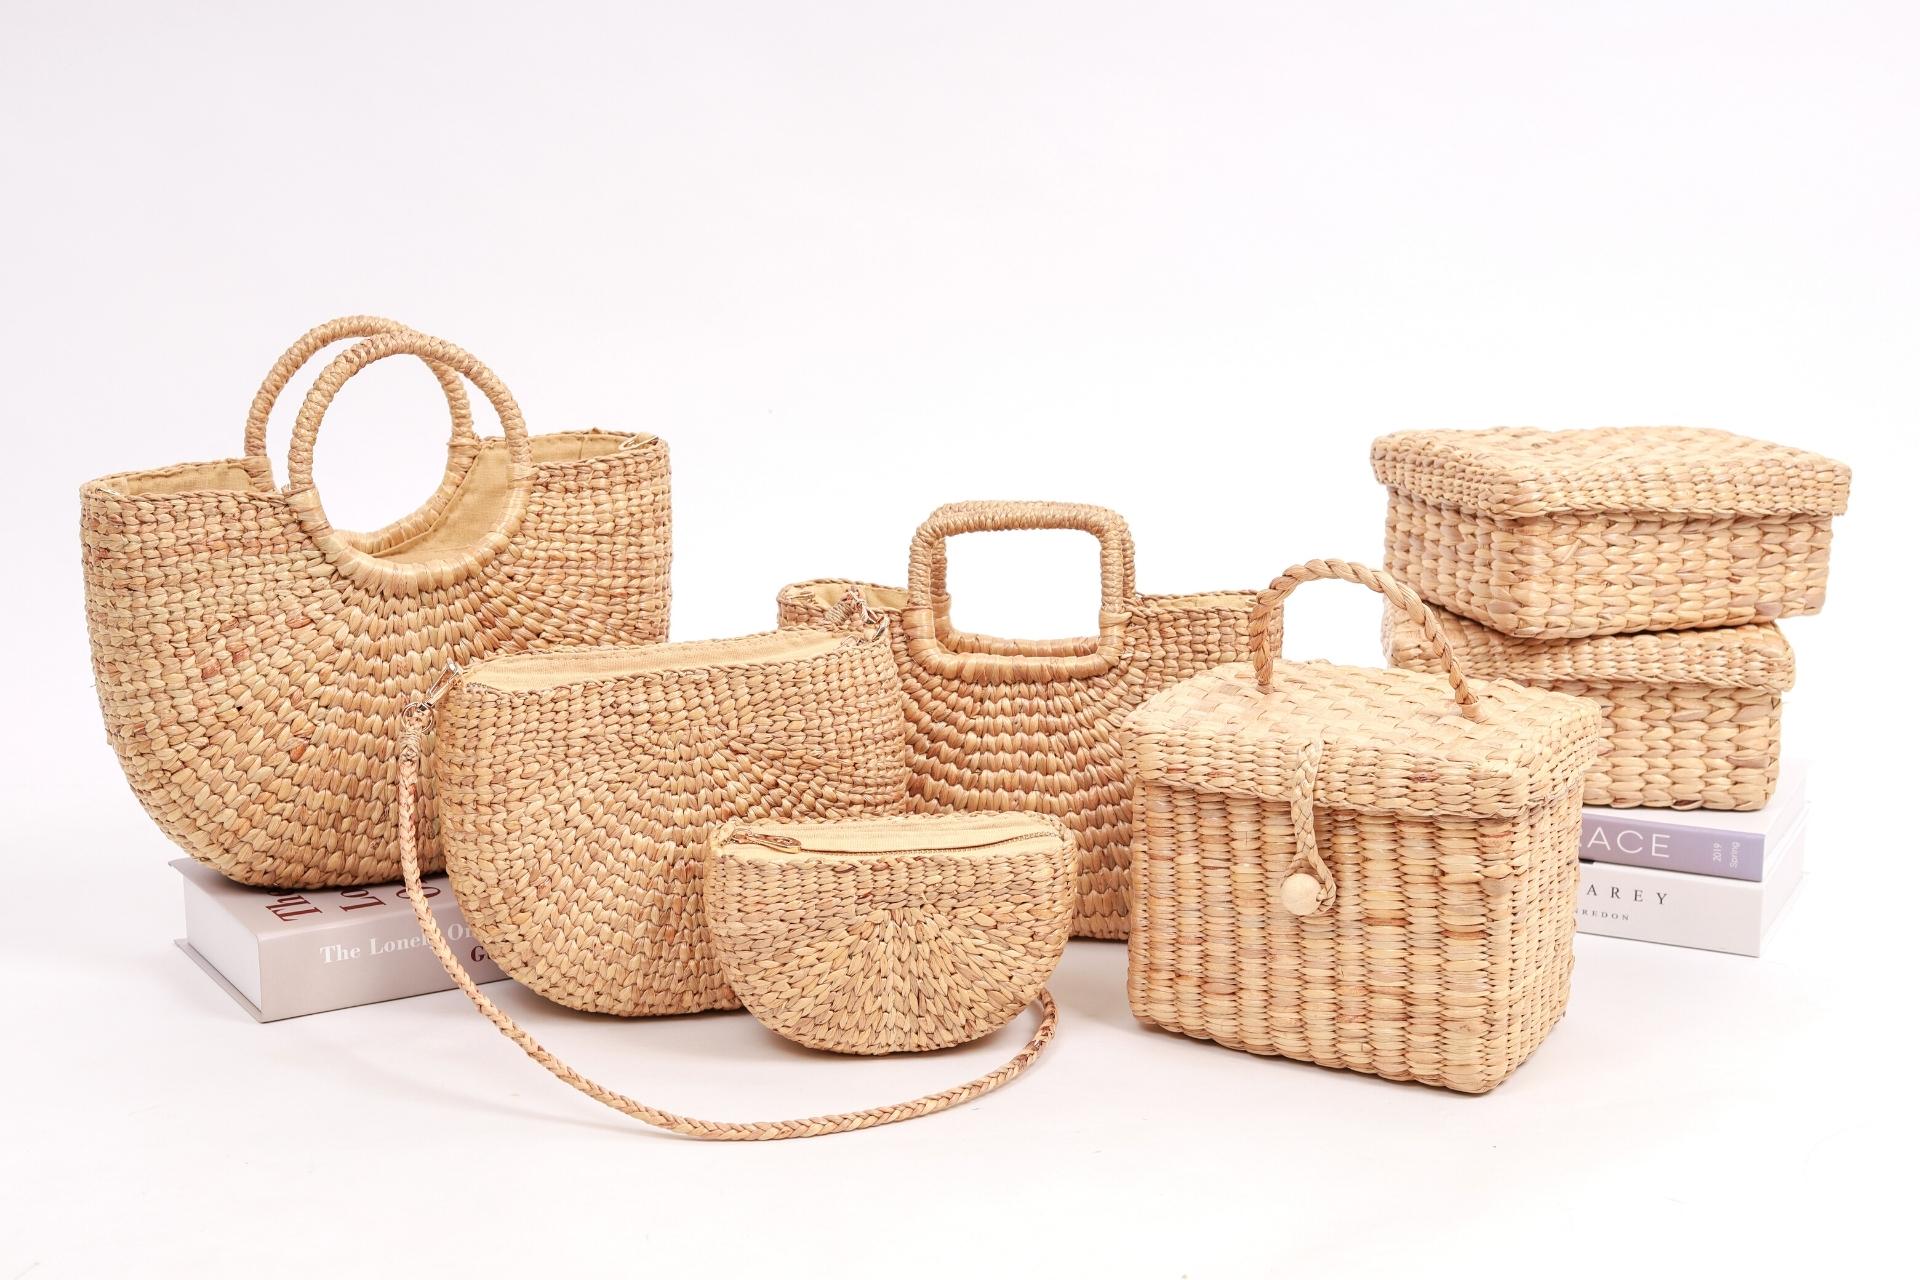 Eco-friendly handbags and seagrass baskets 